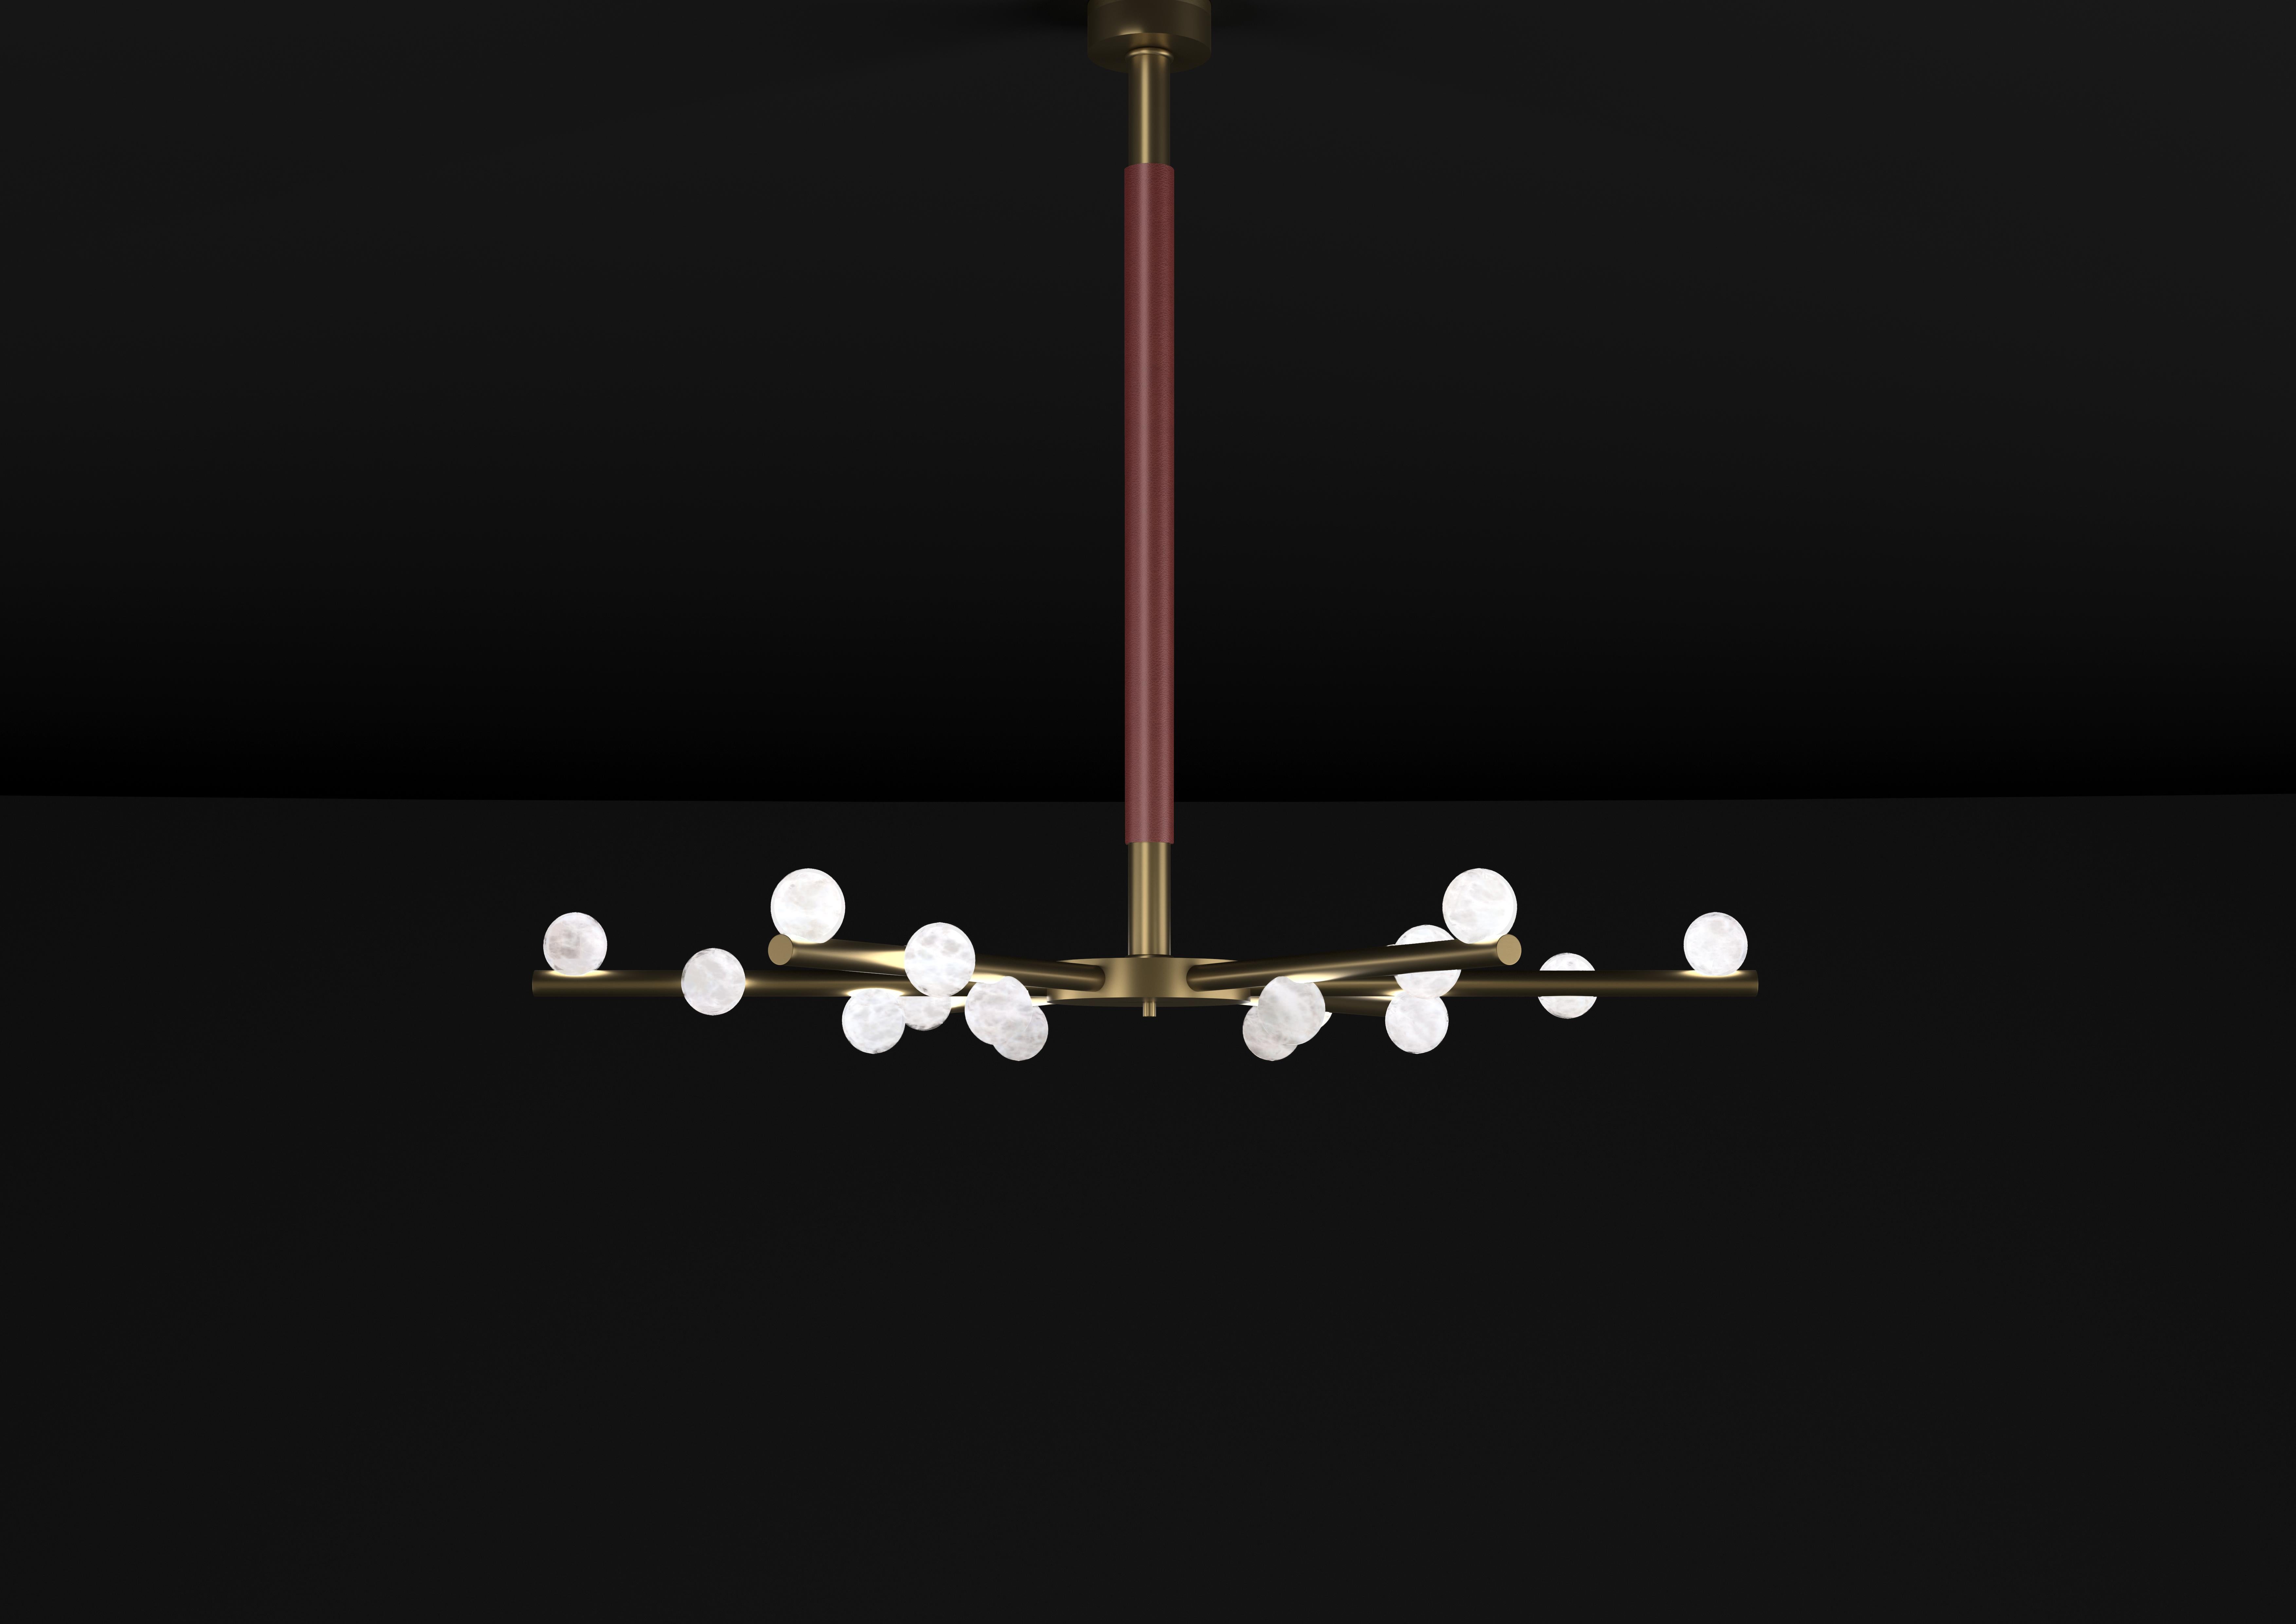 Demetra Bronze Chandelier by Alabastro Italiano
Dimensions: D 85 x W 97 x H 85 cm.
Materials: White alabaster, bronze and leather.

Available in different finishes: Shiny Silver, Bronze, Brushed Brass, Ruggine of Florence, Brushed Burnished, Shiny